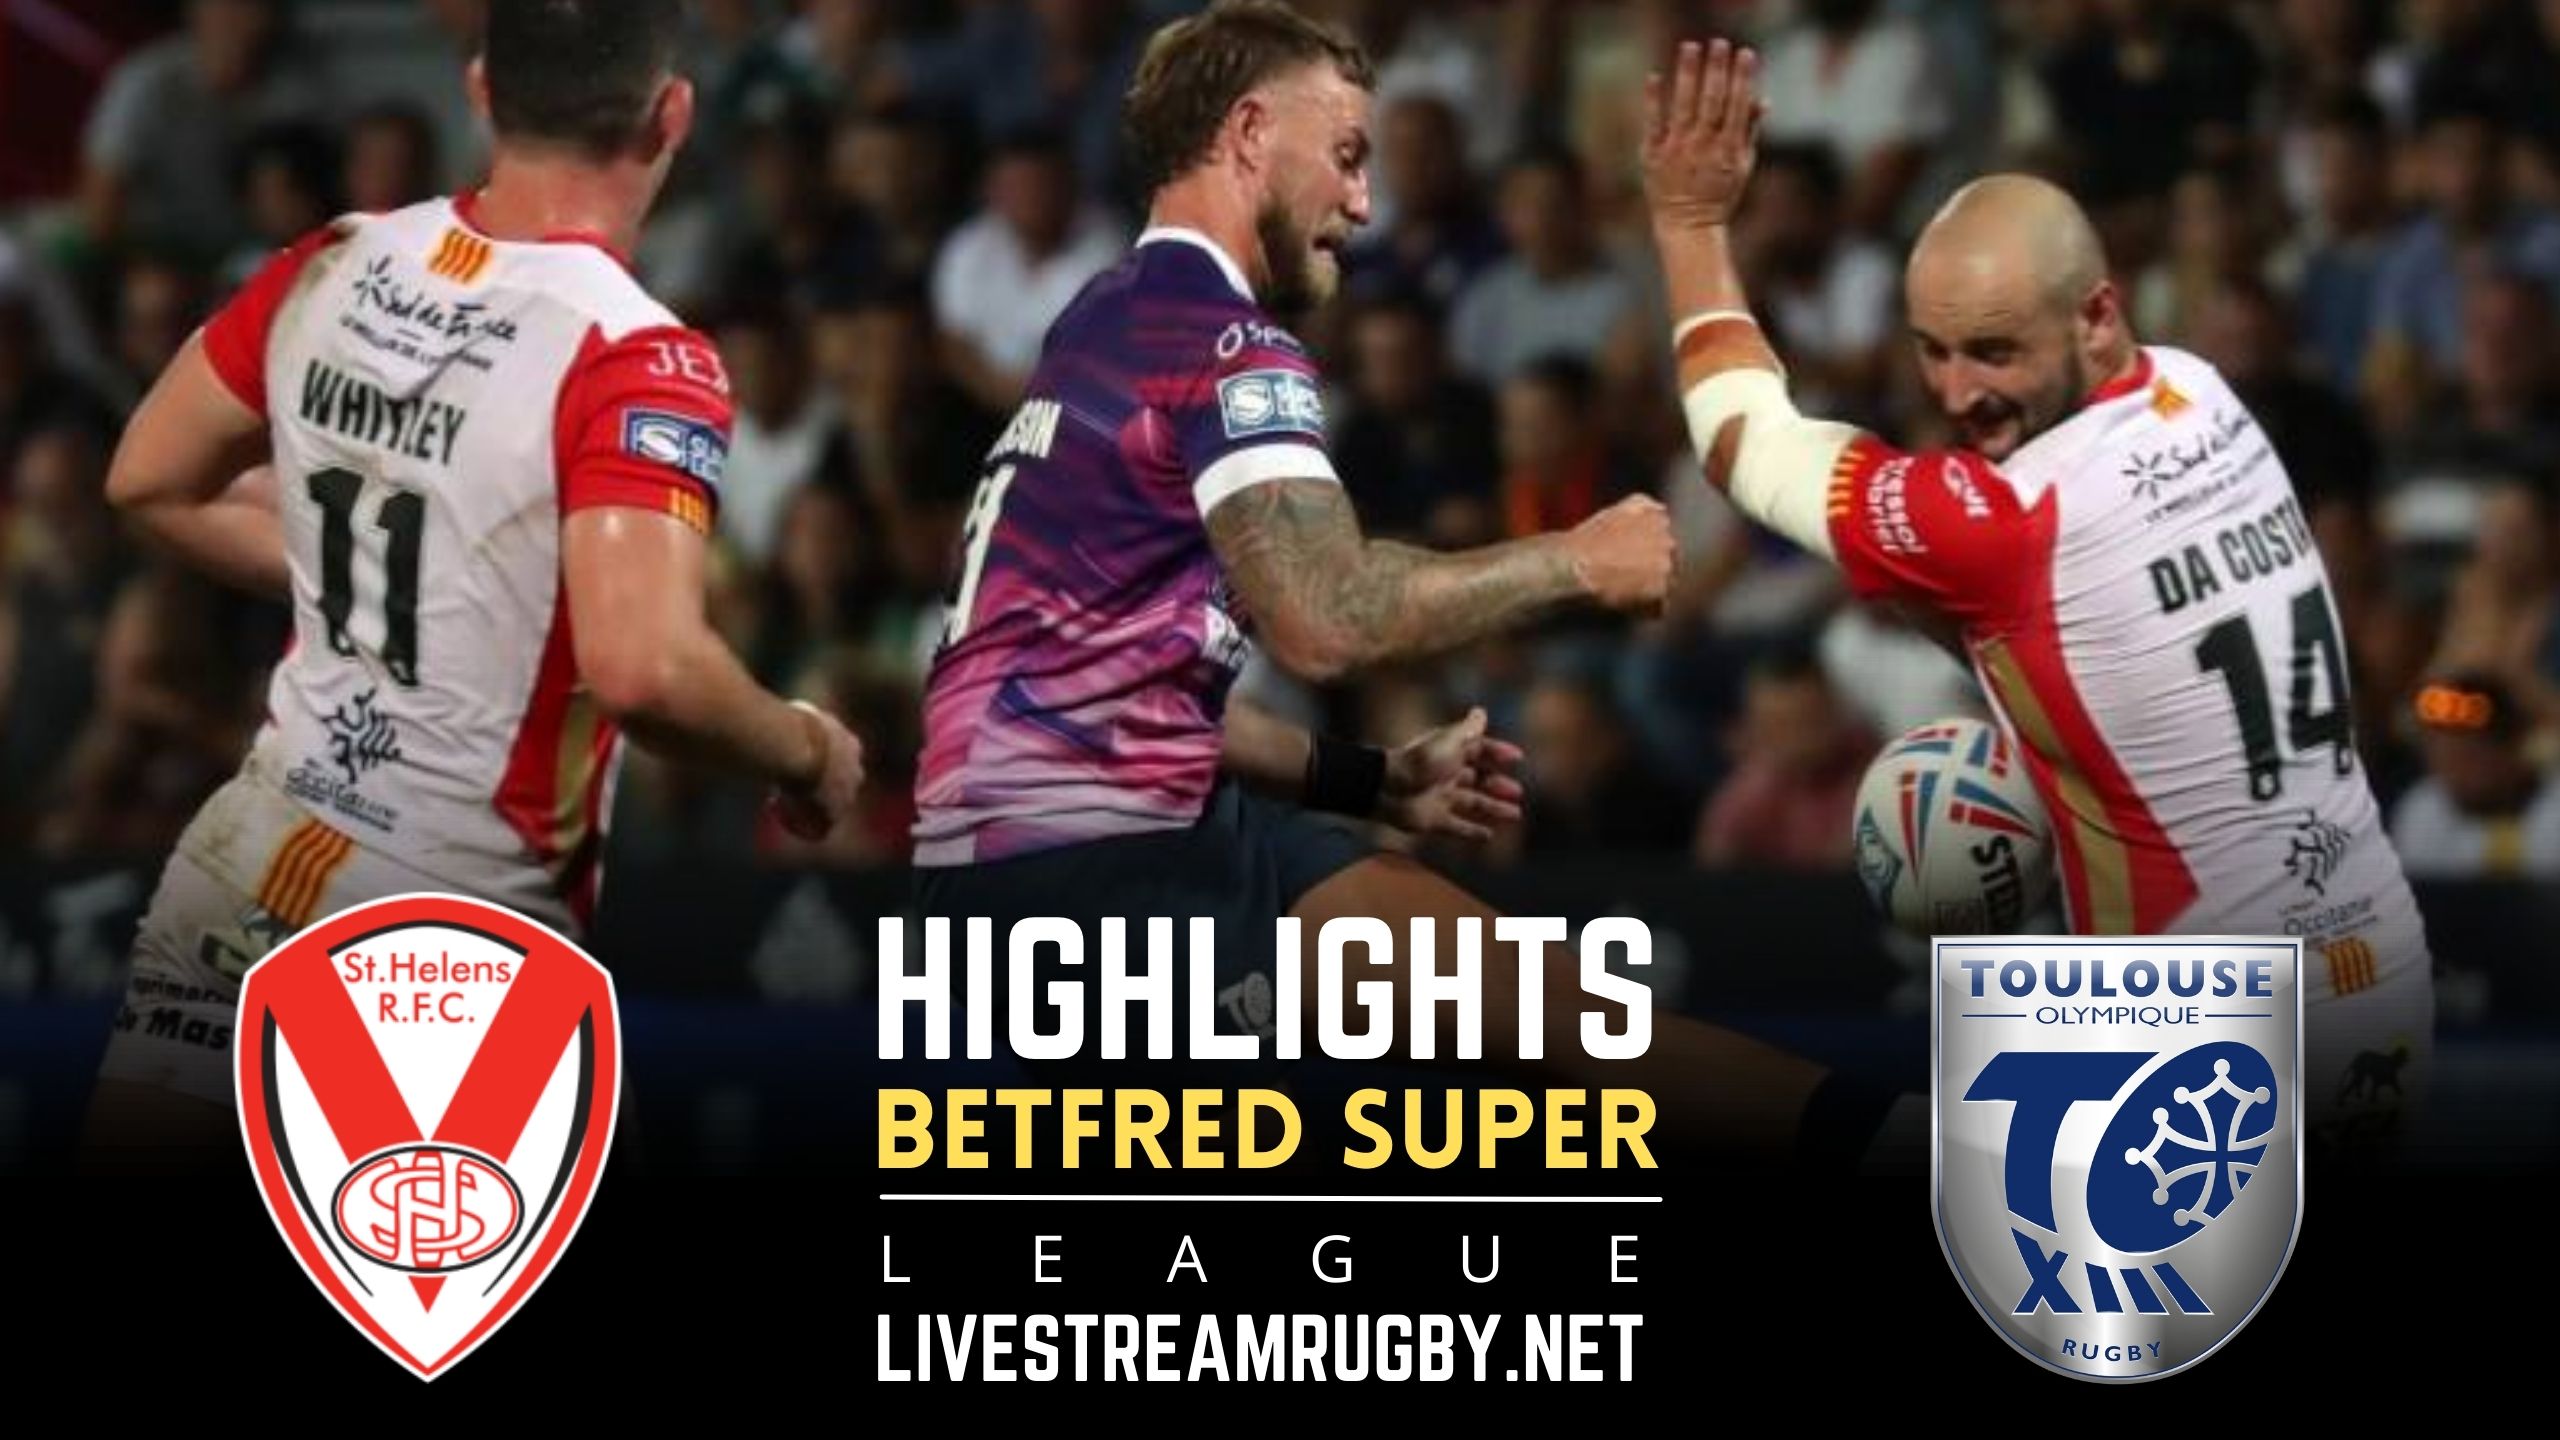 St Helens Vs Toulouse Rd 27 Highlights 2022